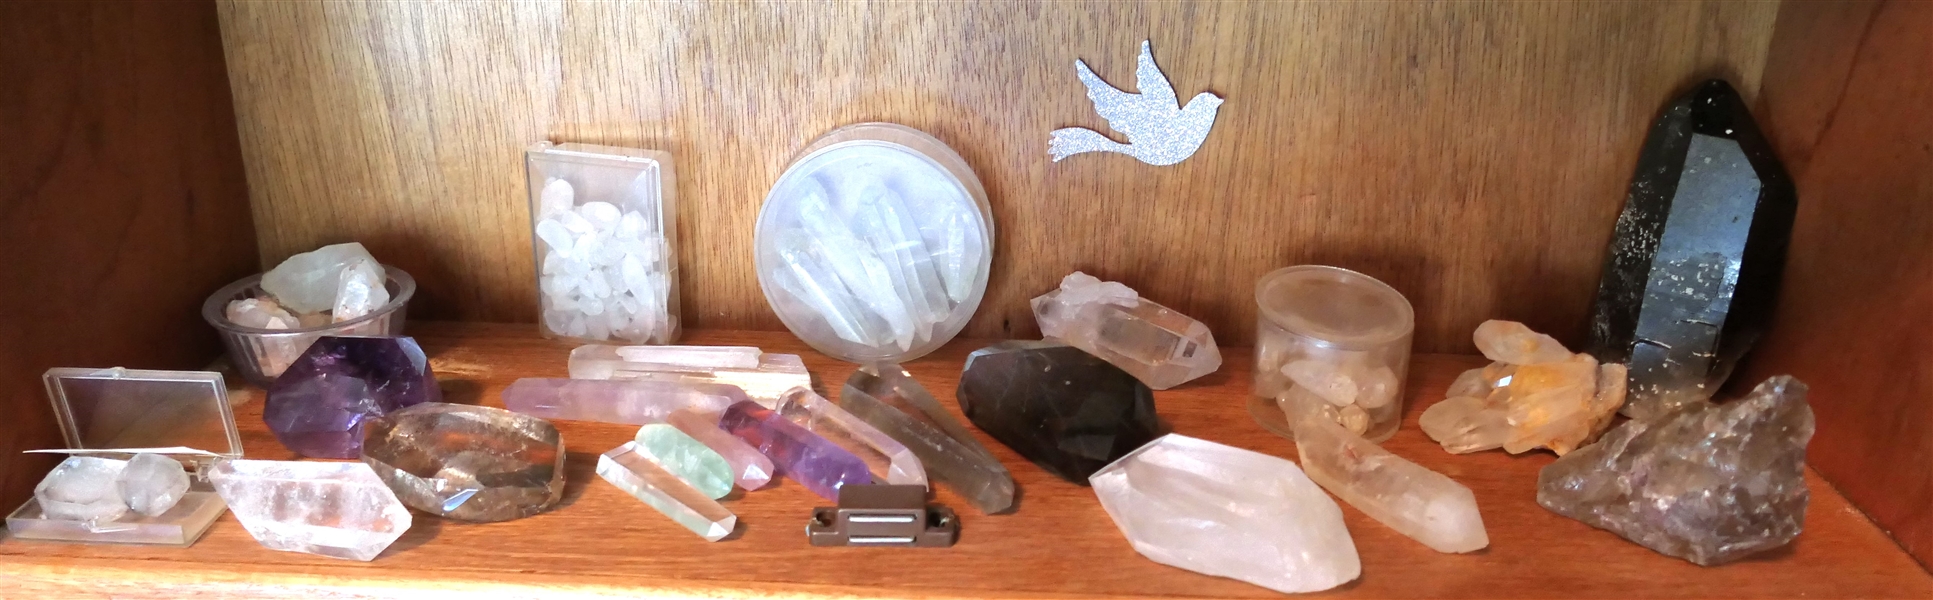 Lot of Crystals - Clear Quartz, Purple, and Brown 